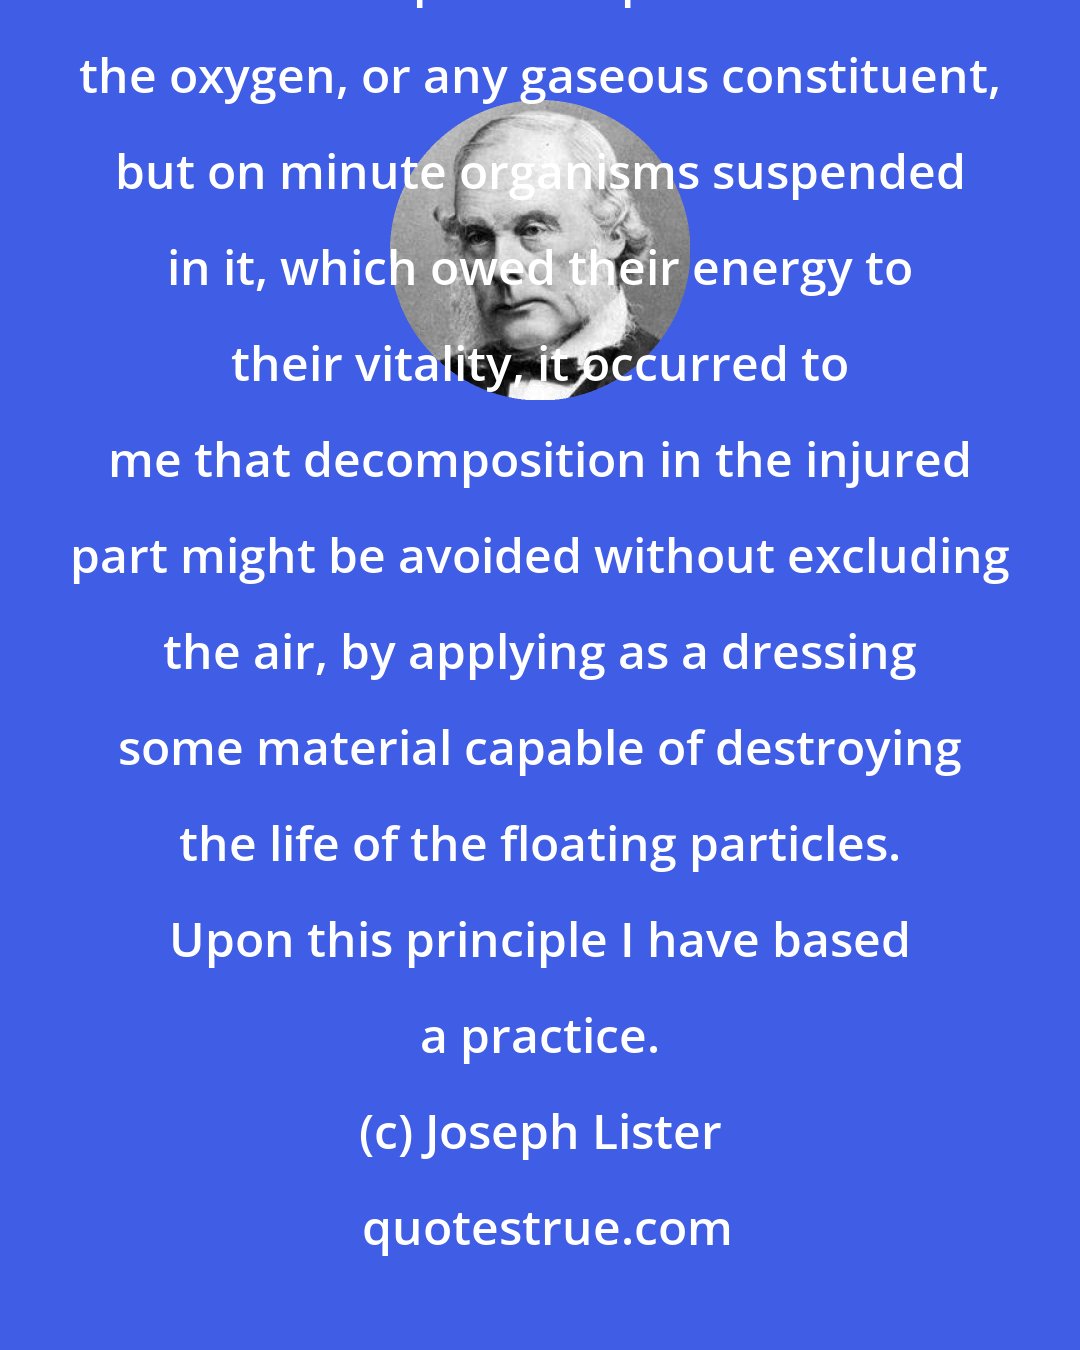 Joseph Lister: But when it has been shown by the researches of Pasteur that the septic property of the atmosphere depended not on the oxygen, or any gaseous constituent, but on minute organisms suspended in it, which owed their energy to their vitality, it occurred to me that decomposition in the injured part might be avoided without excluding the air, by applying as a dressing some material capable of destroying the life of the floating particles. Upon this principle I have based a practice.